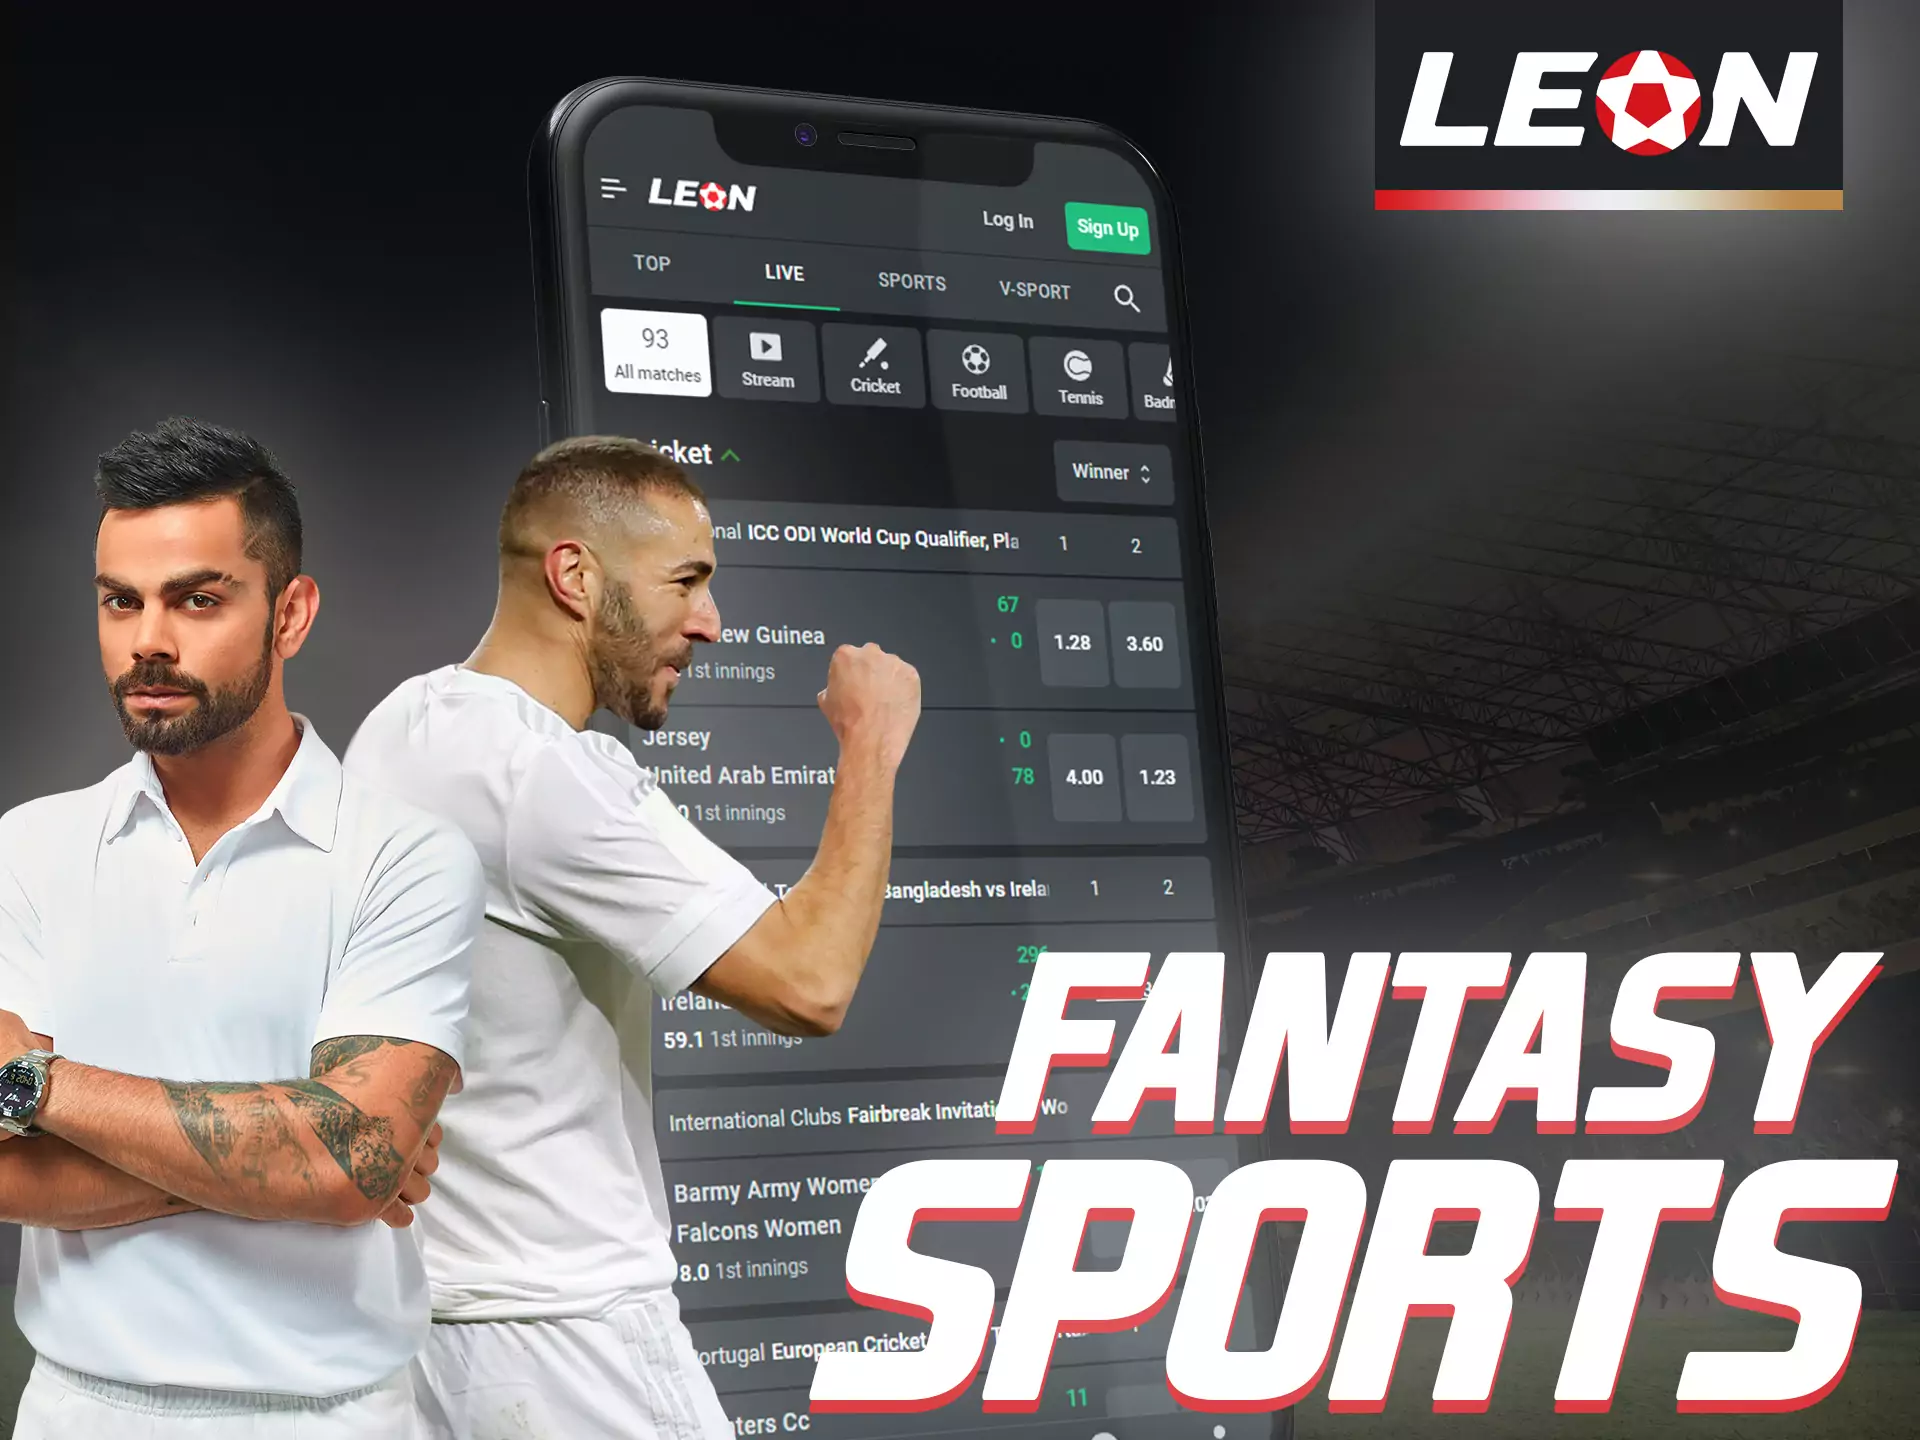 With the Leonbet app, bet on fantasy sports.